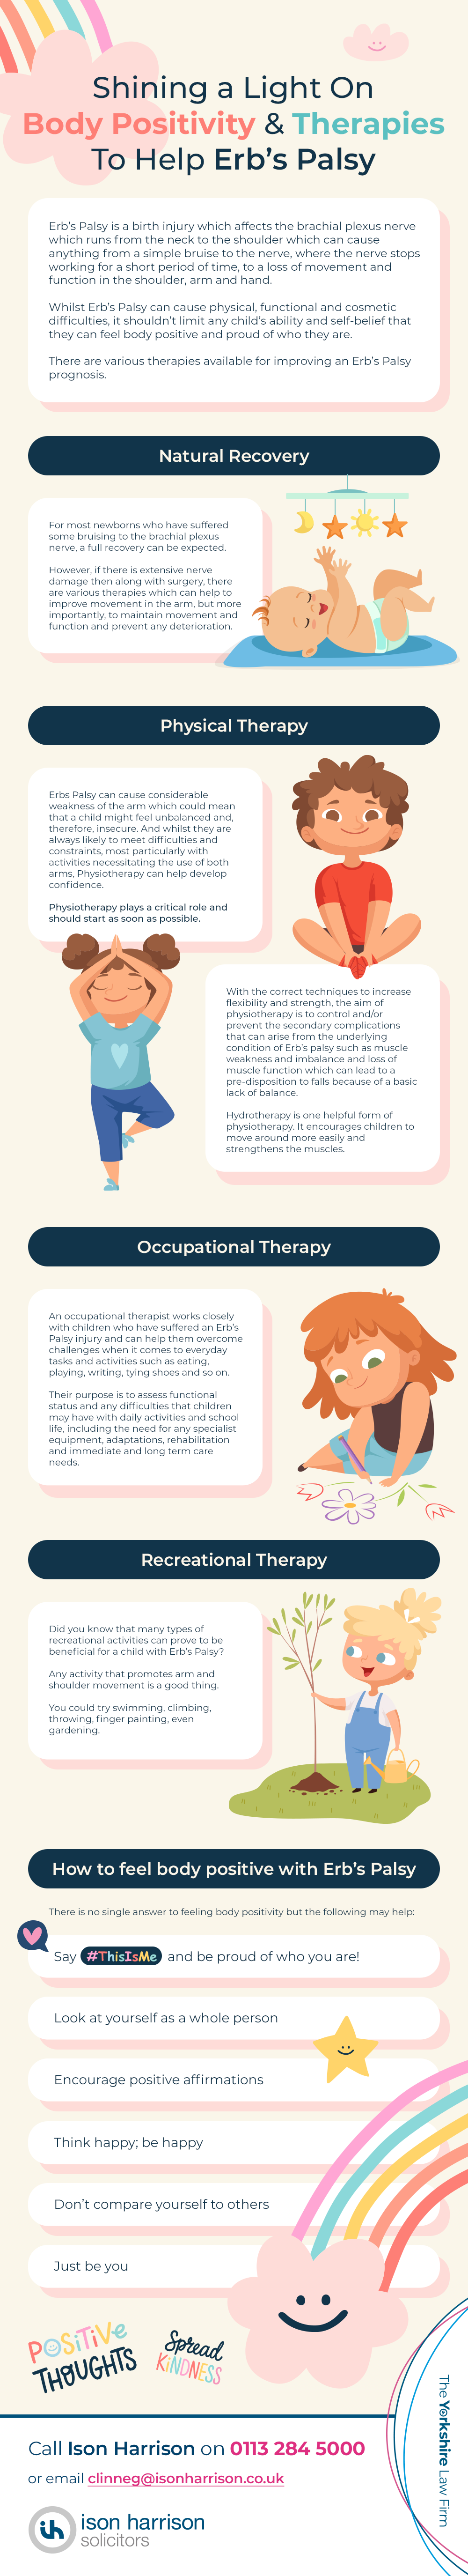 how to be body positive with erb's palsy infographic